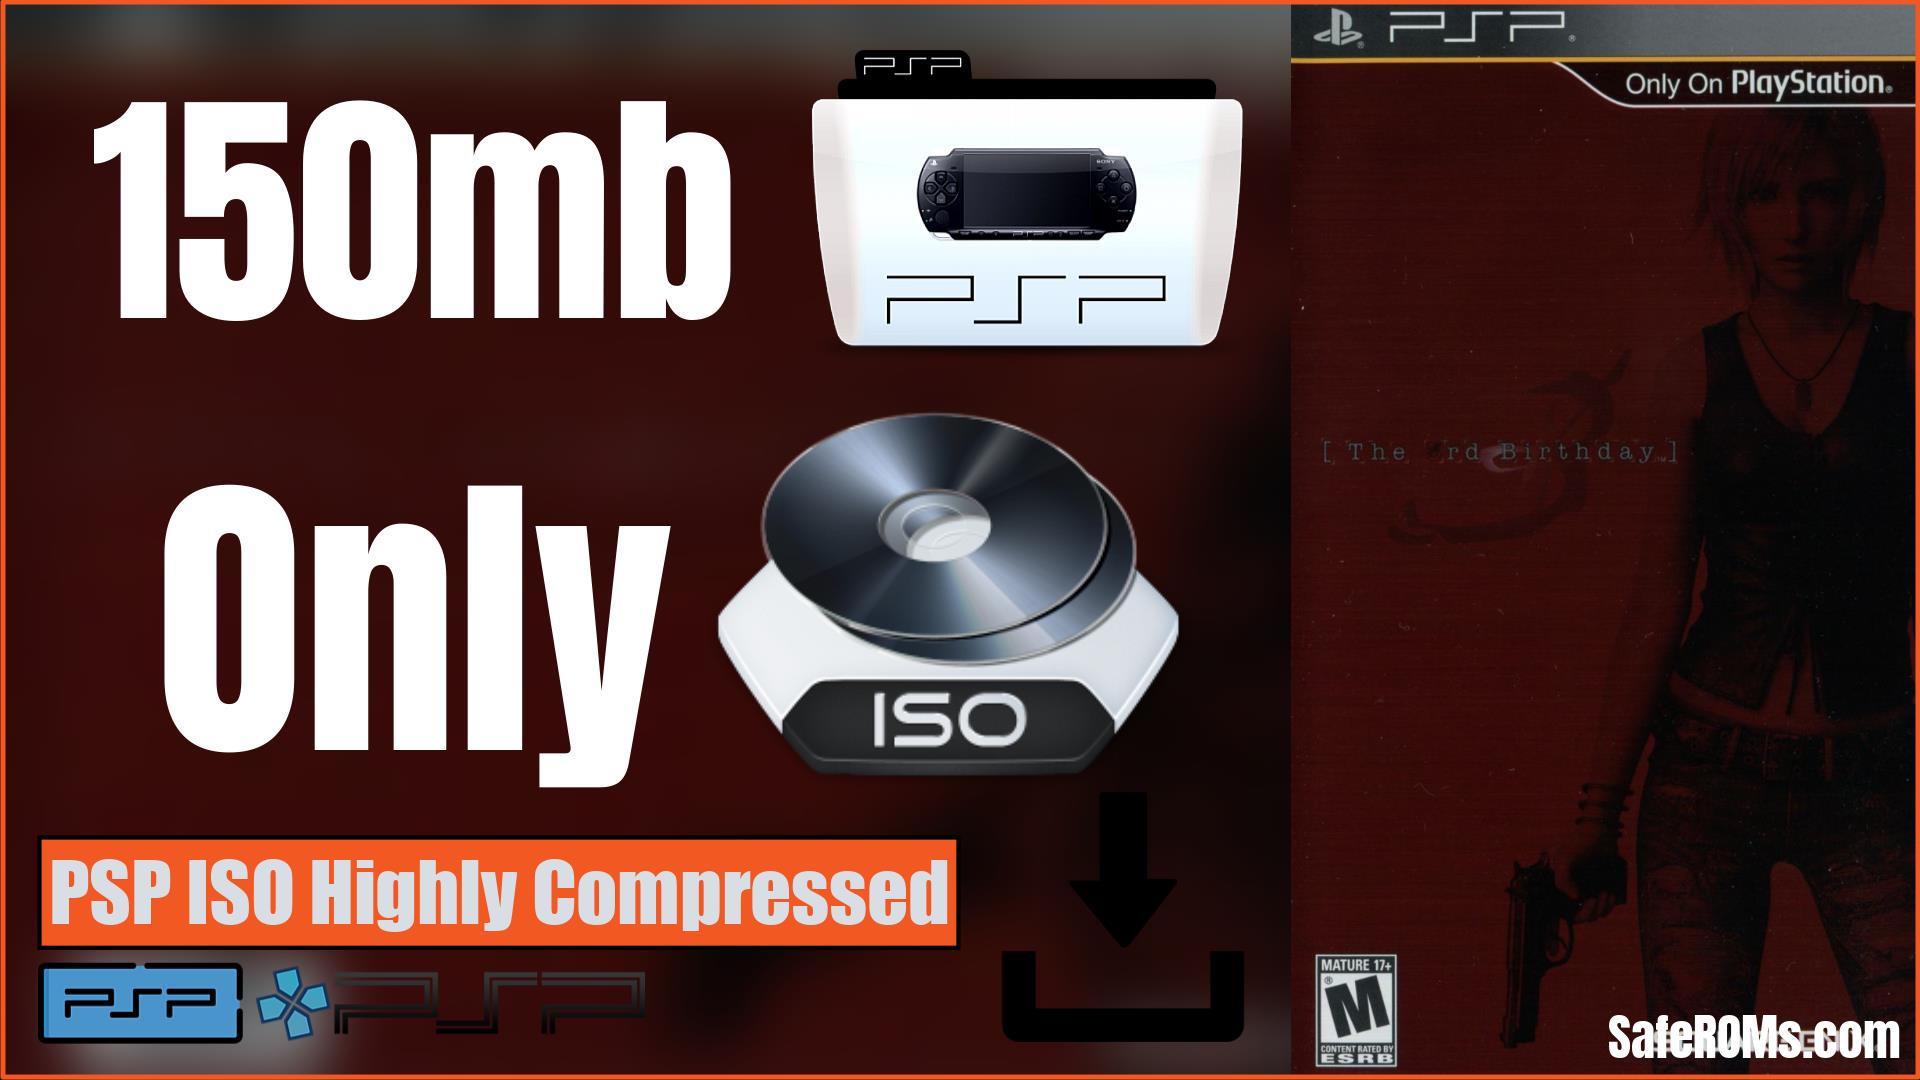 The 3rd Birthday PSP ISO Highly Compressed Download